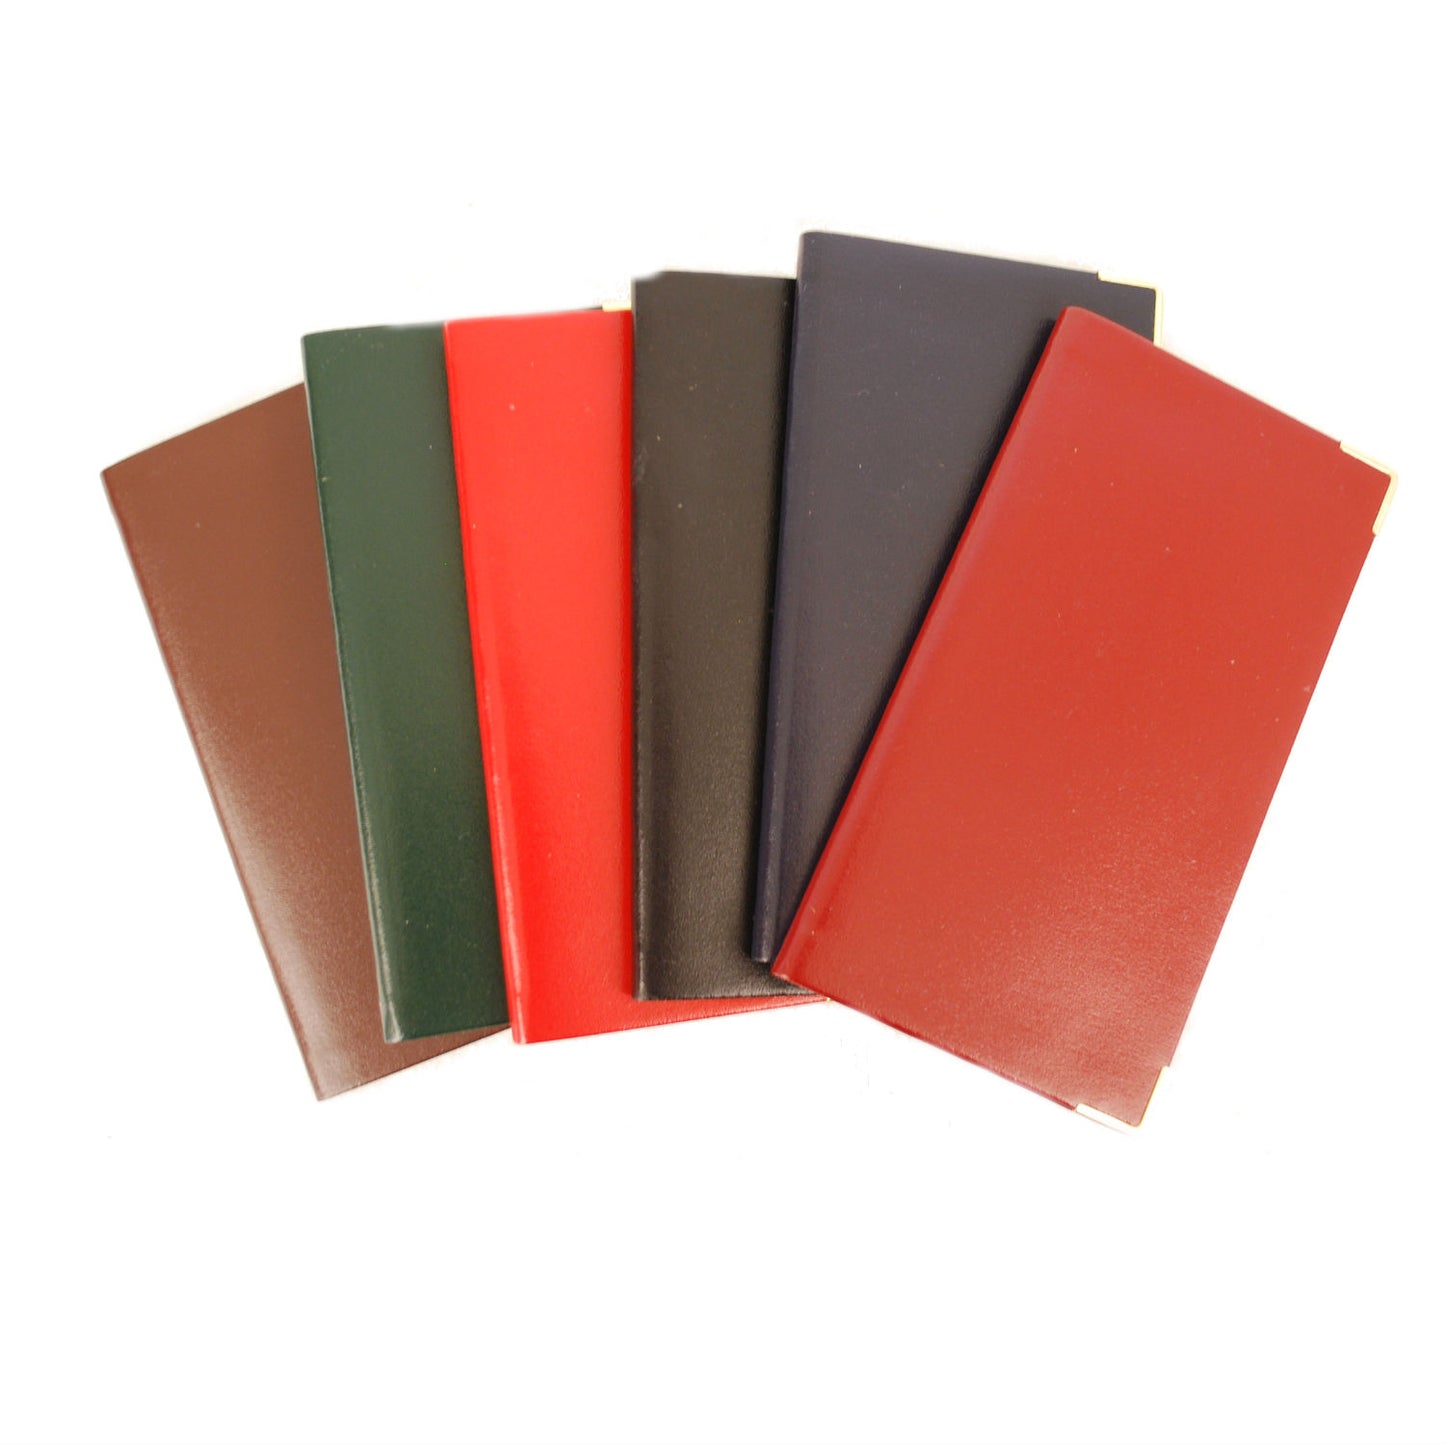 Address Book | 6 by 3 | Bonded Leather | A63BL